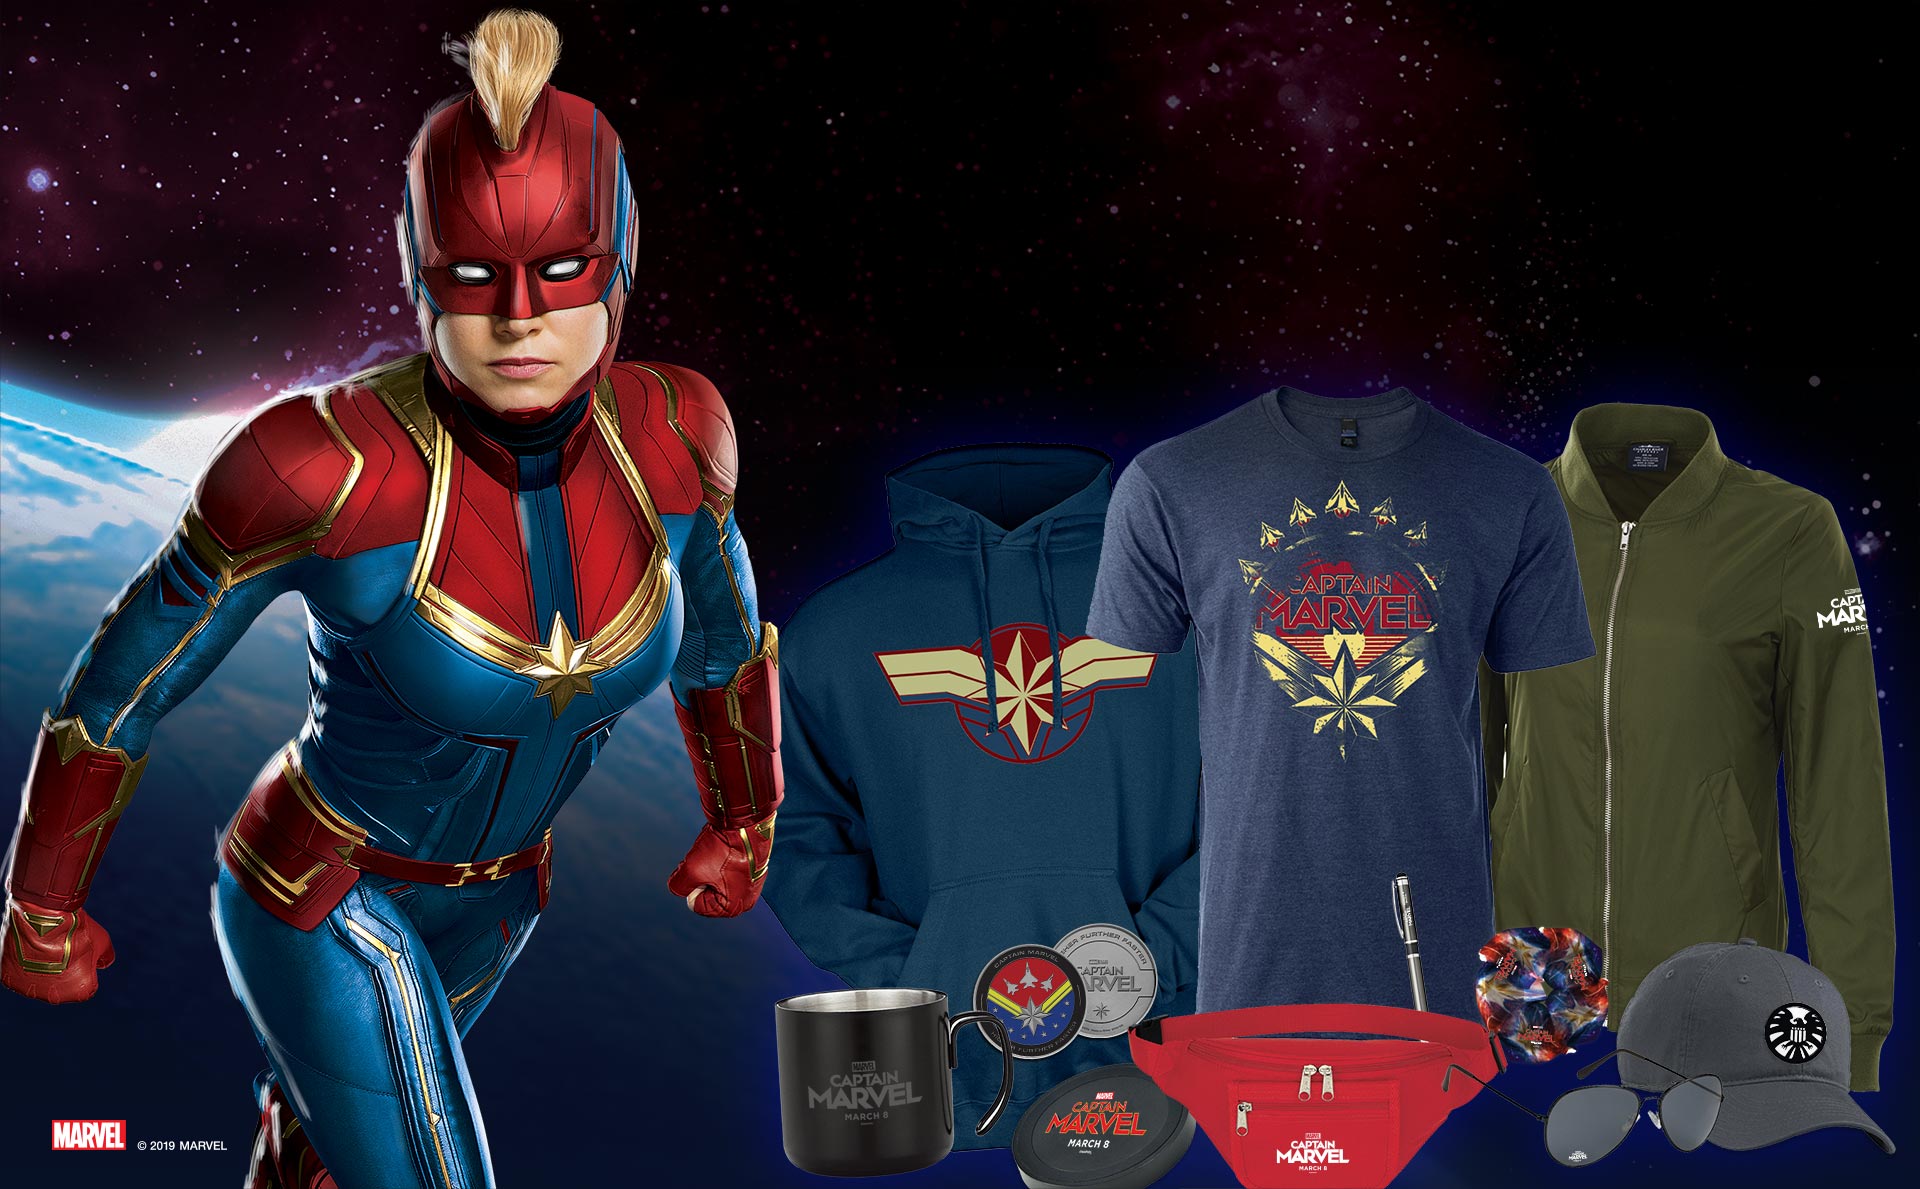 Disney Captain Marvel Promo Item rendering with t shirt, bomber jacket, hat, sunglasses, coin and pen